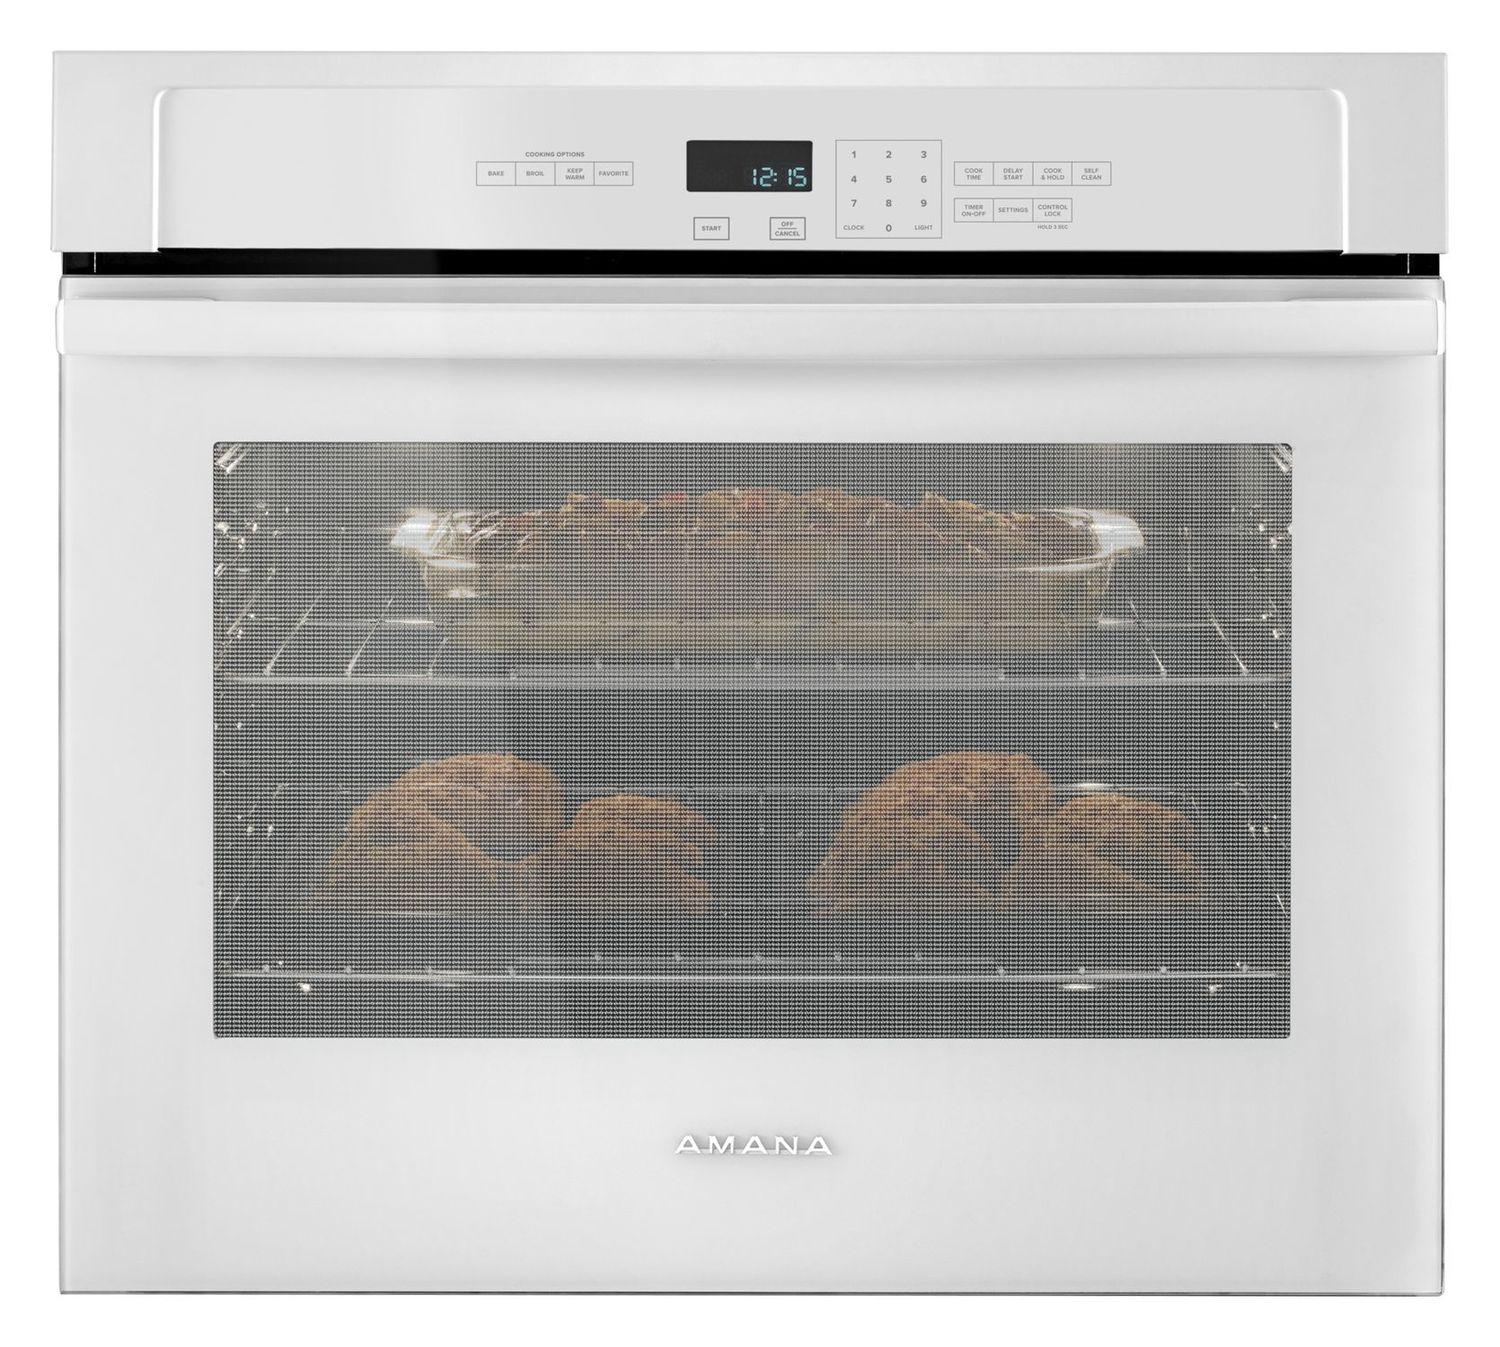 Amana 5.0 cu. ft. Thermal Wall Oven White